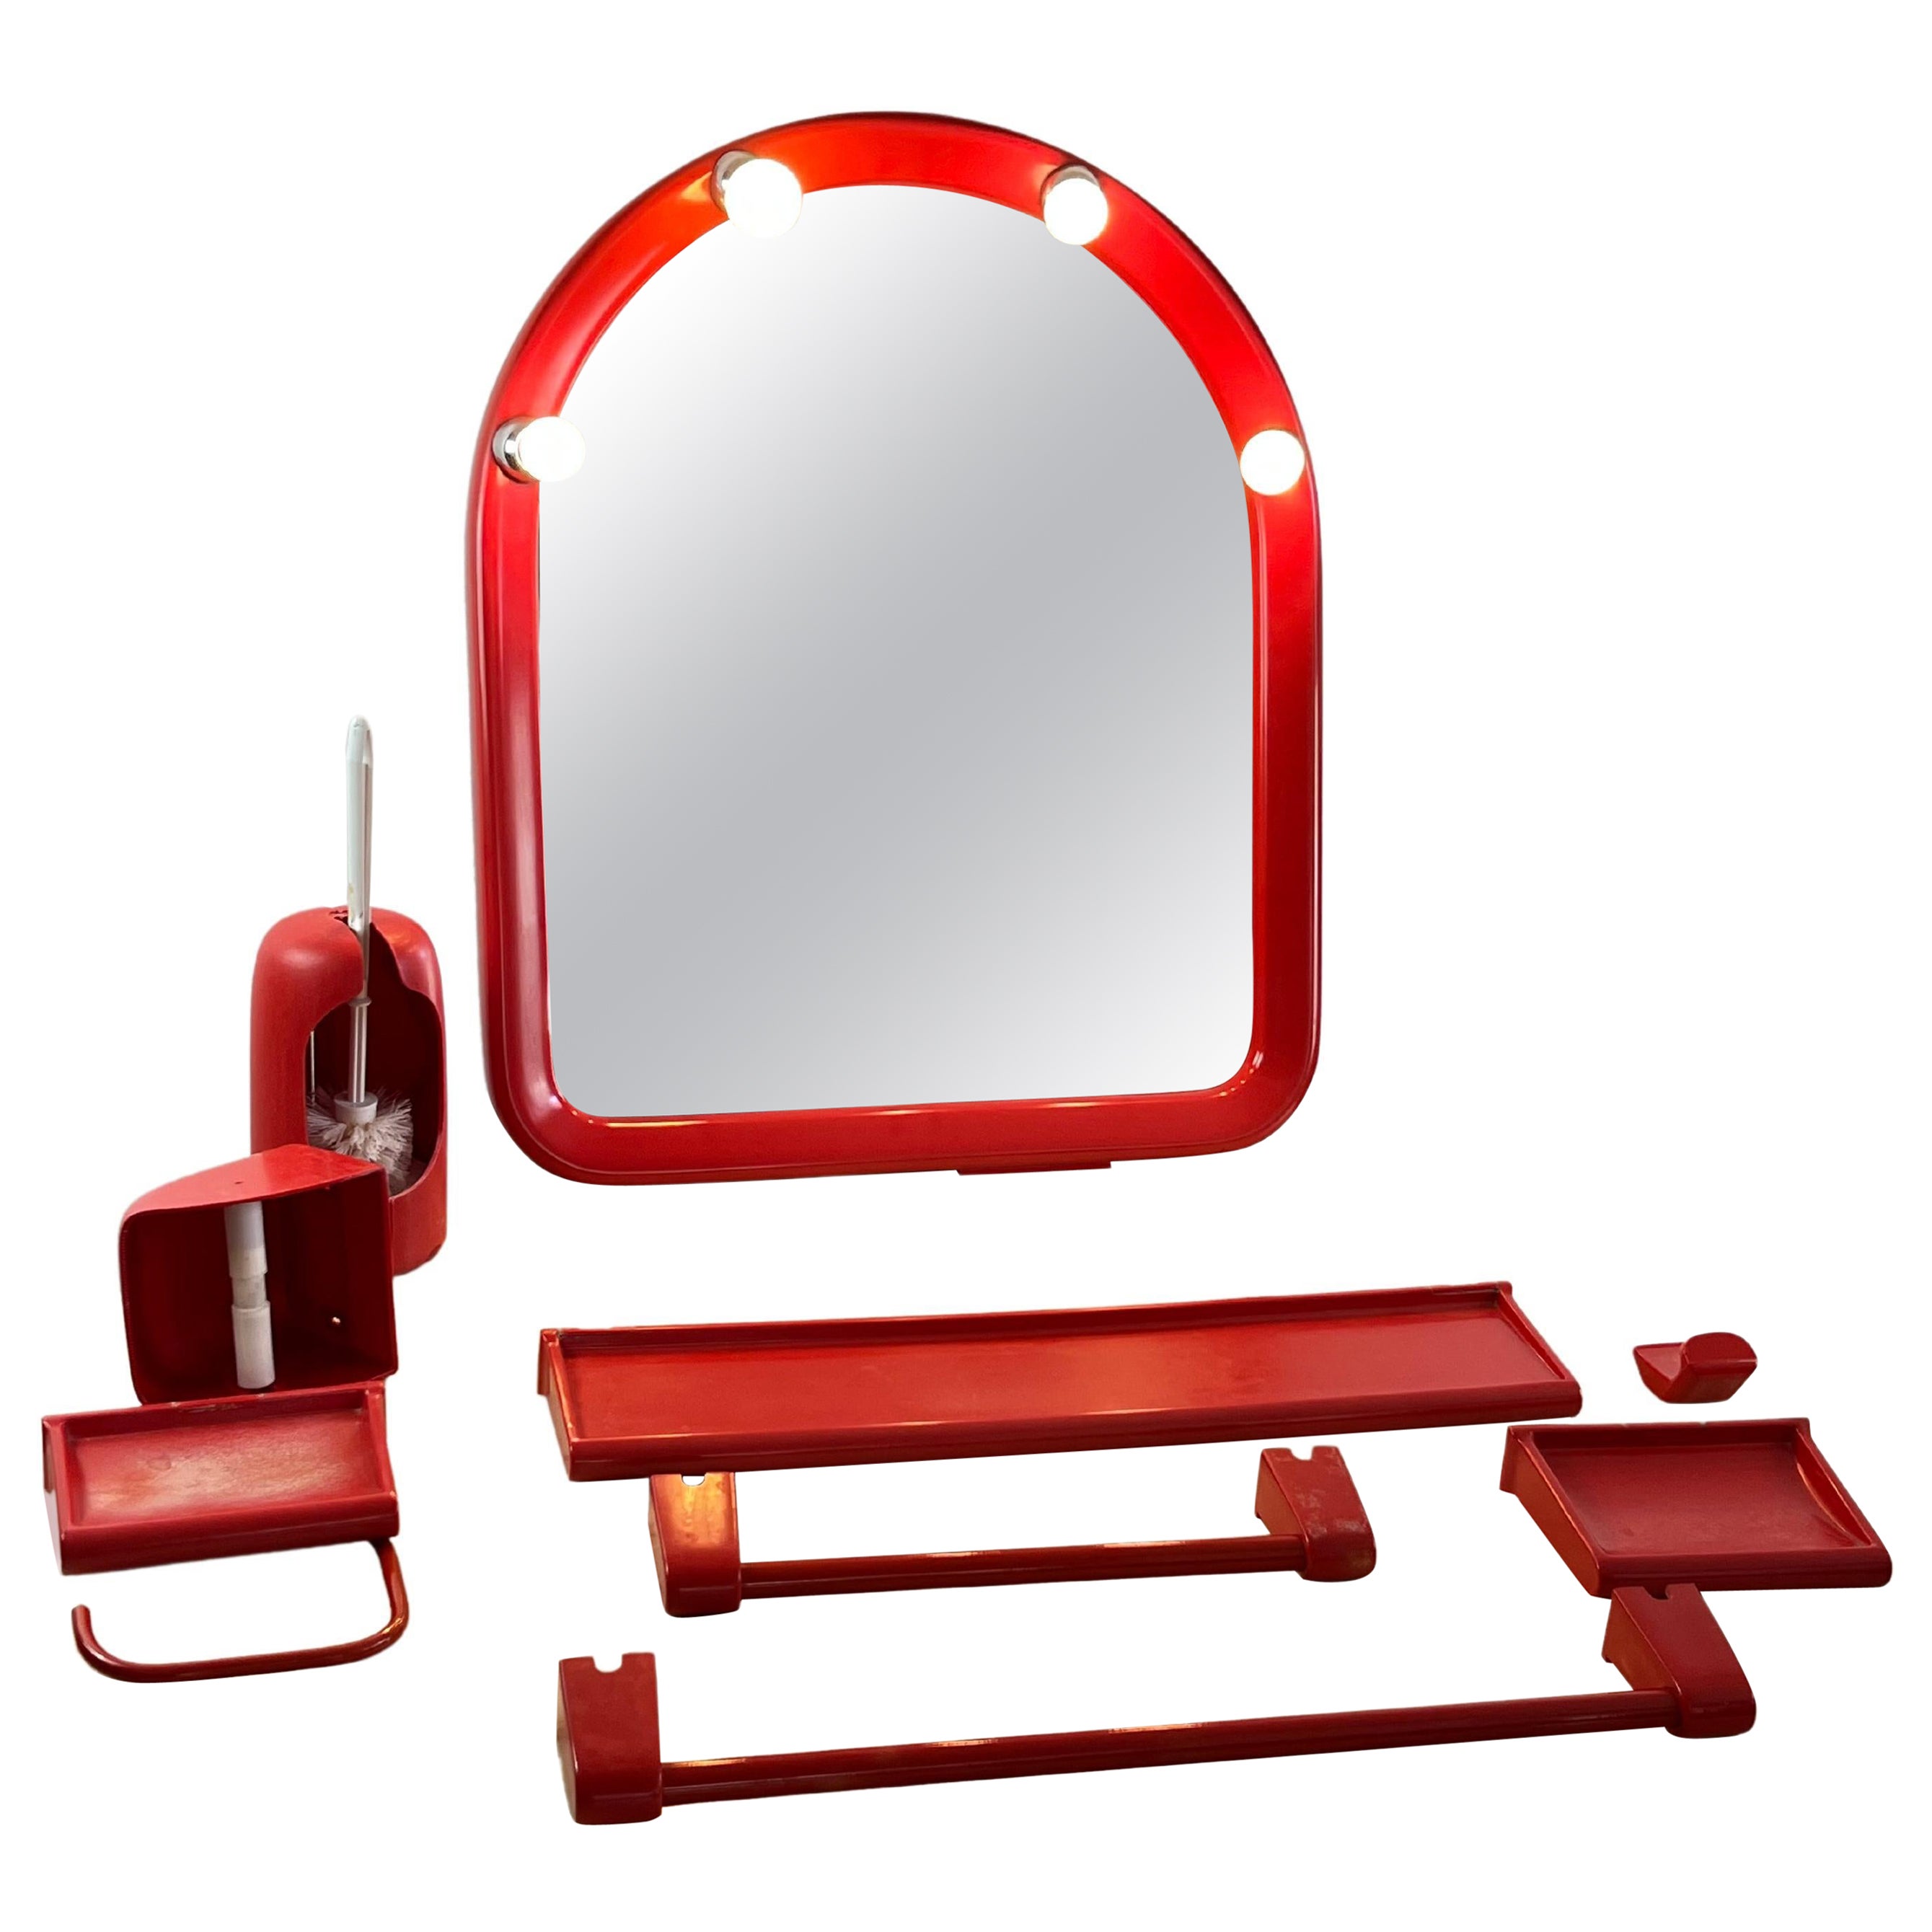 Vintage 9-piece Mirror and Bathroom Accessory Set in red plastic, Italy, 1970s